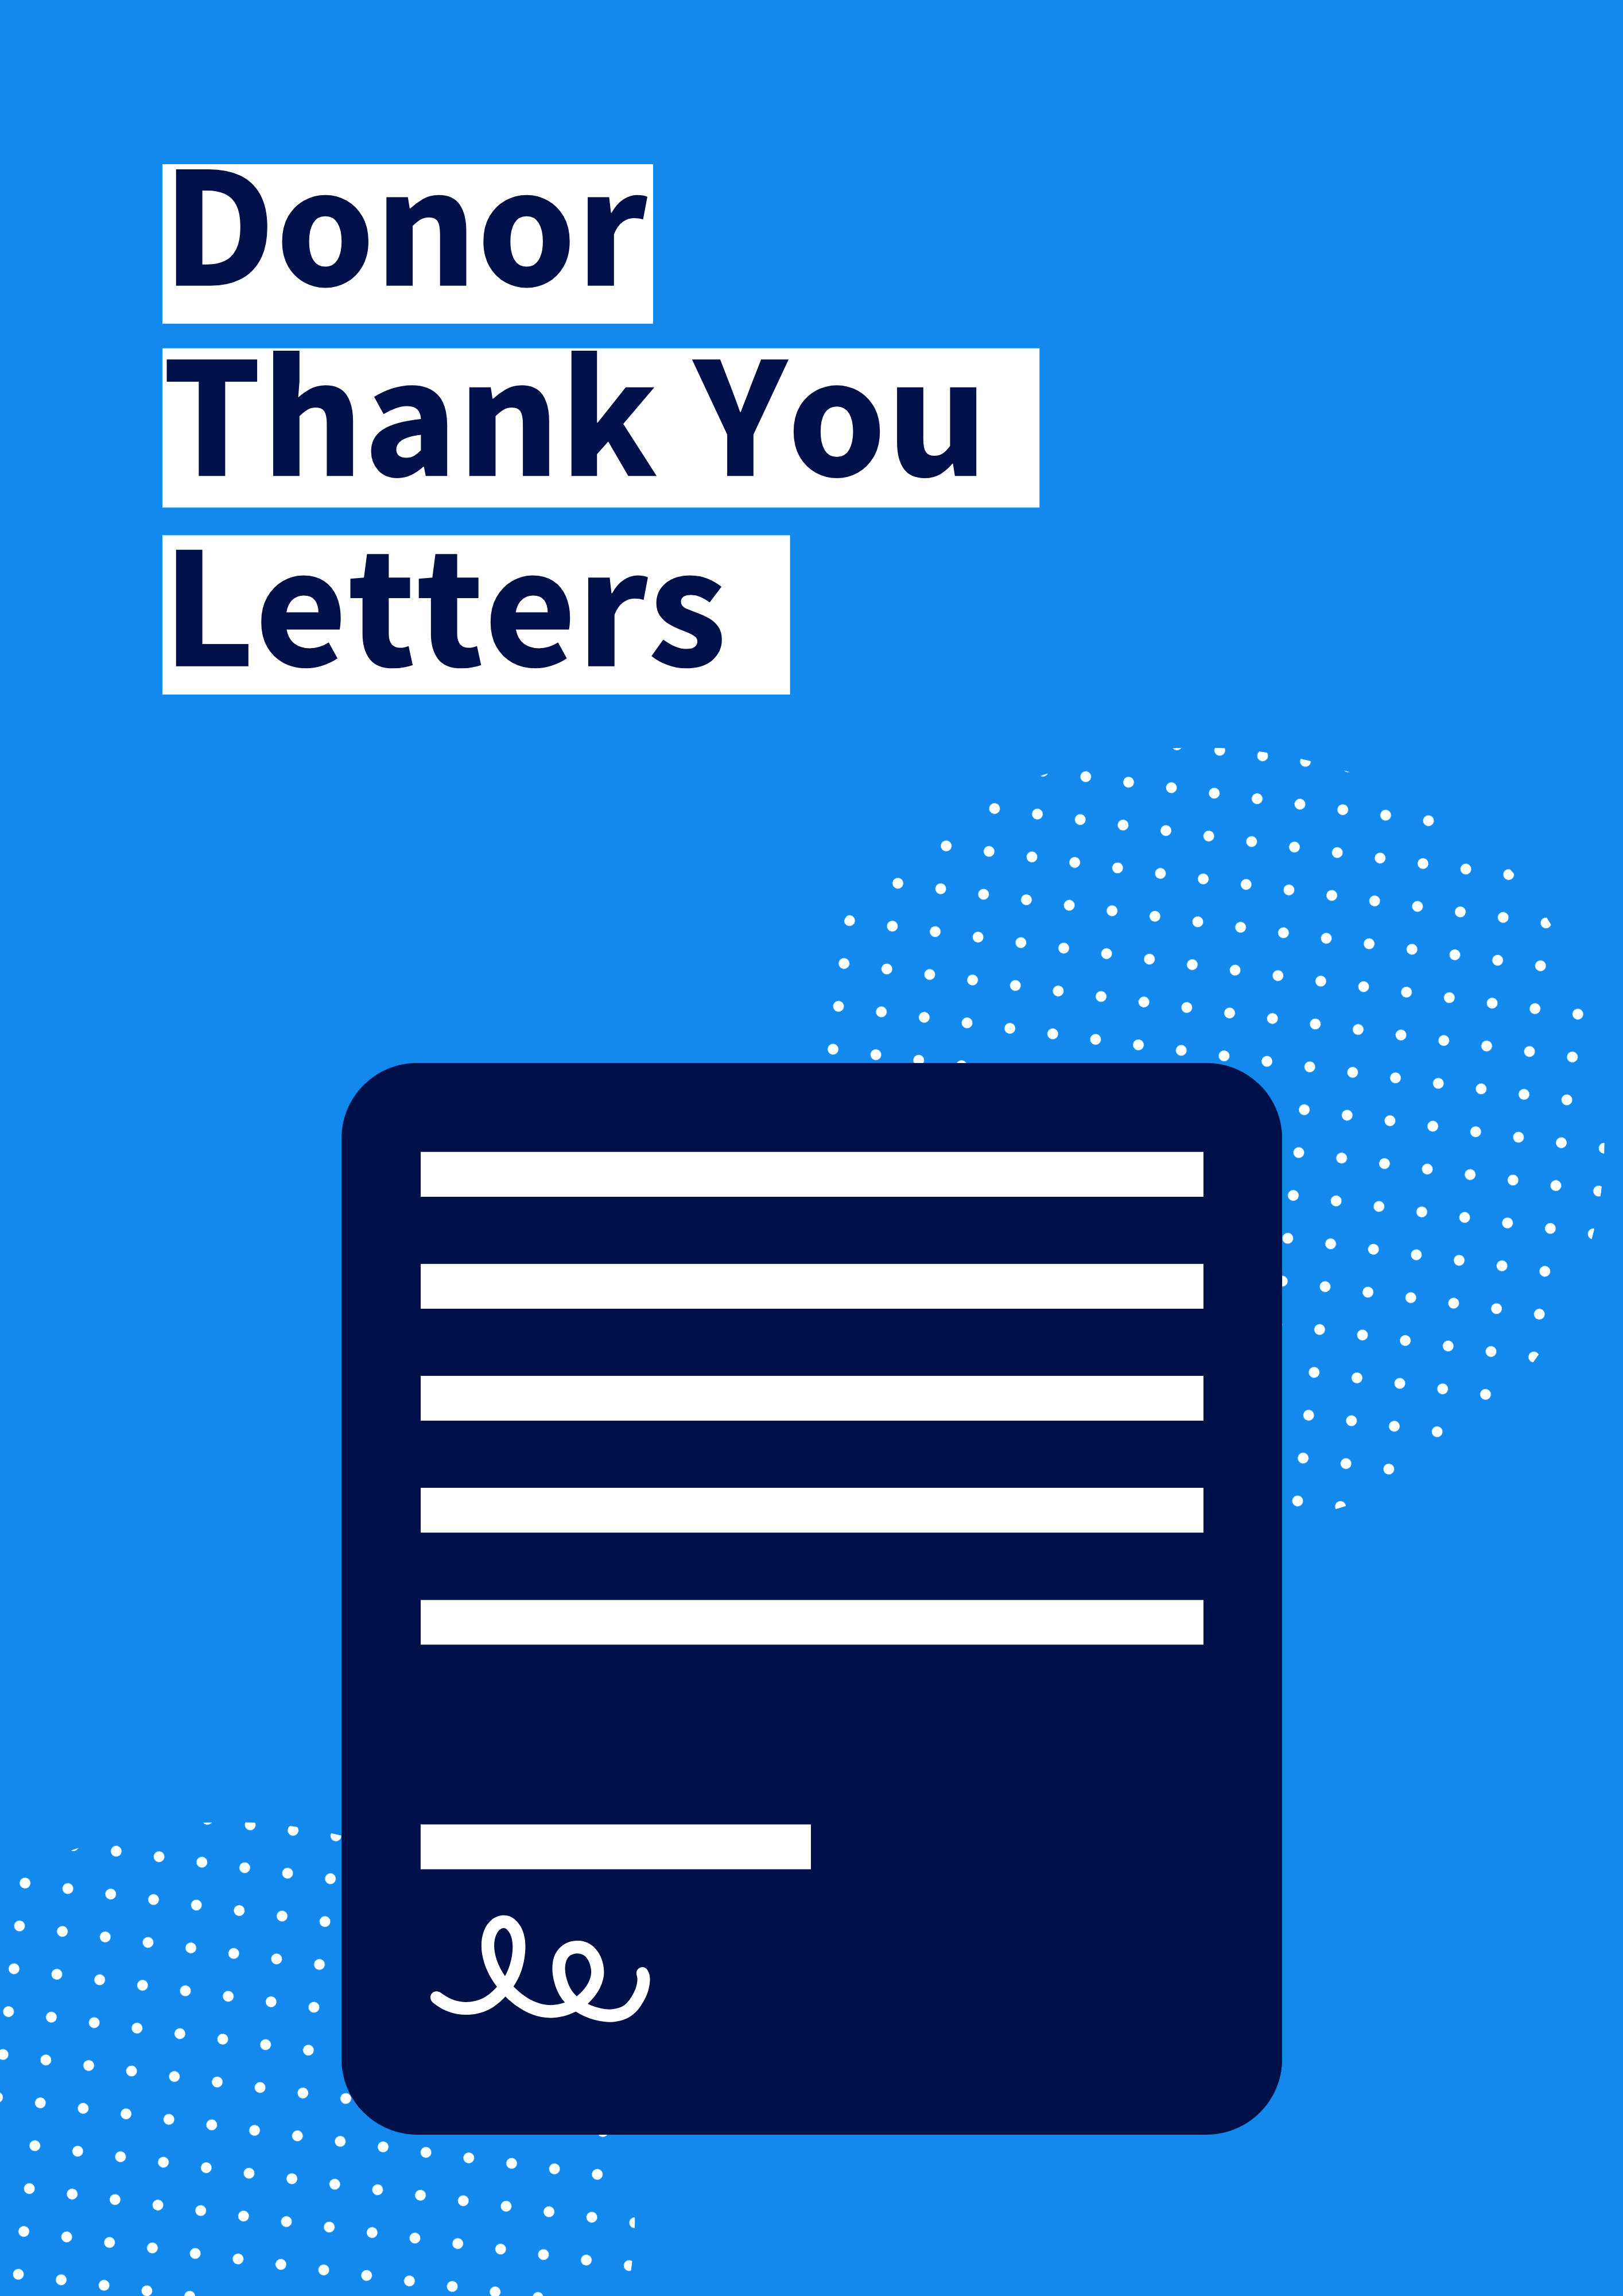 Donor Thank You Letters